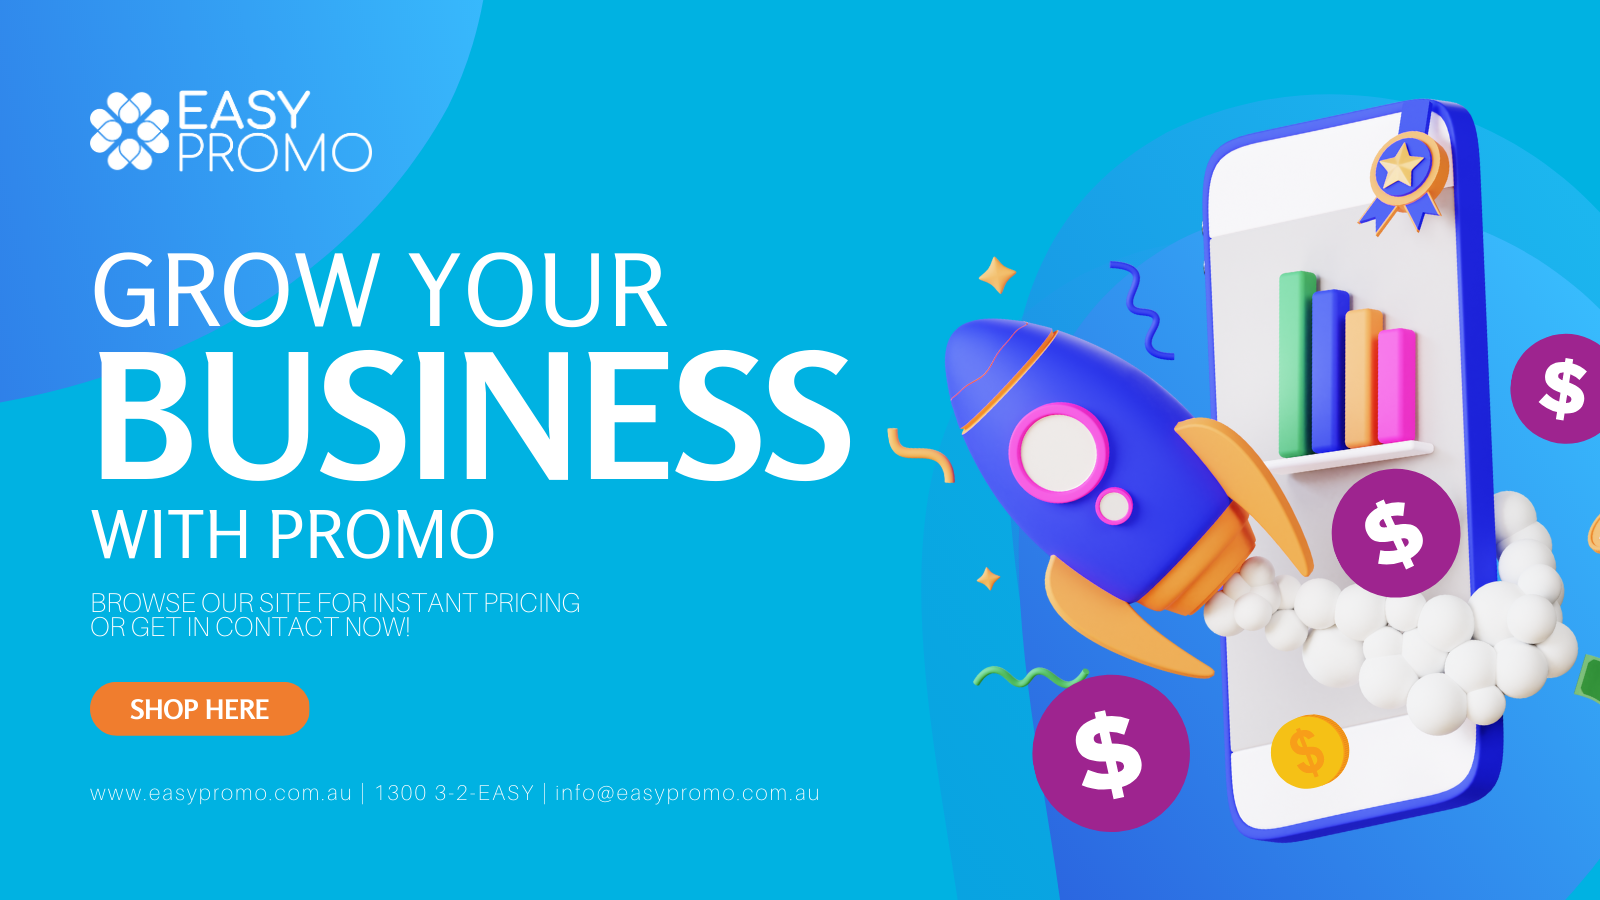 Blog footer, with cute graphics saying grow your business with Promo